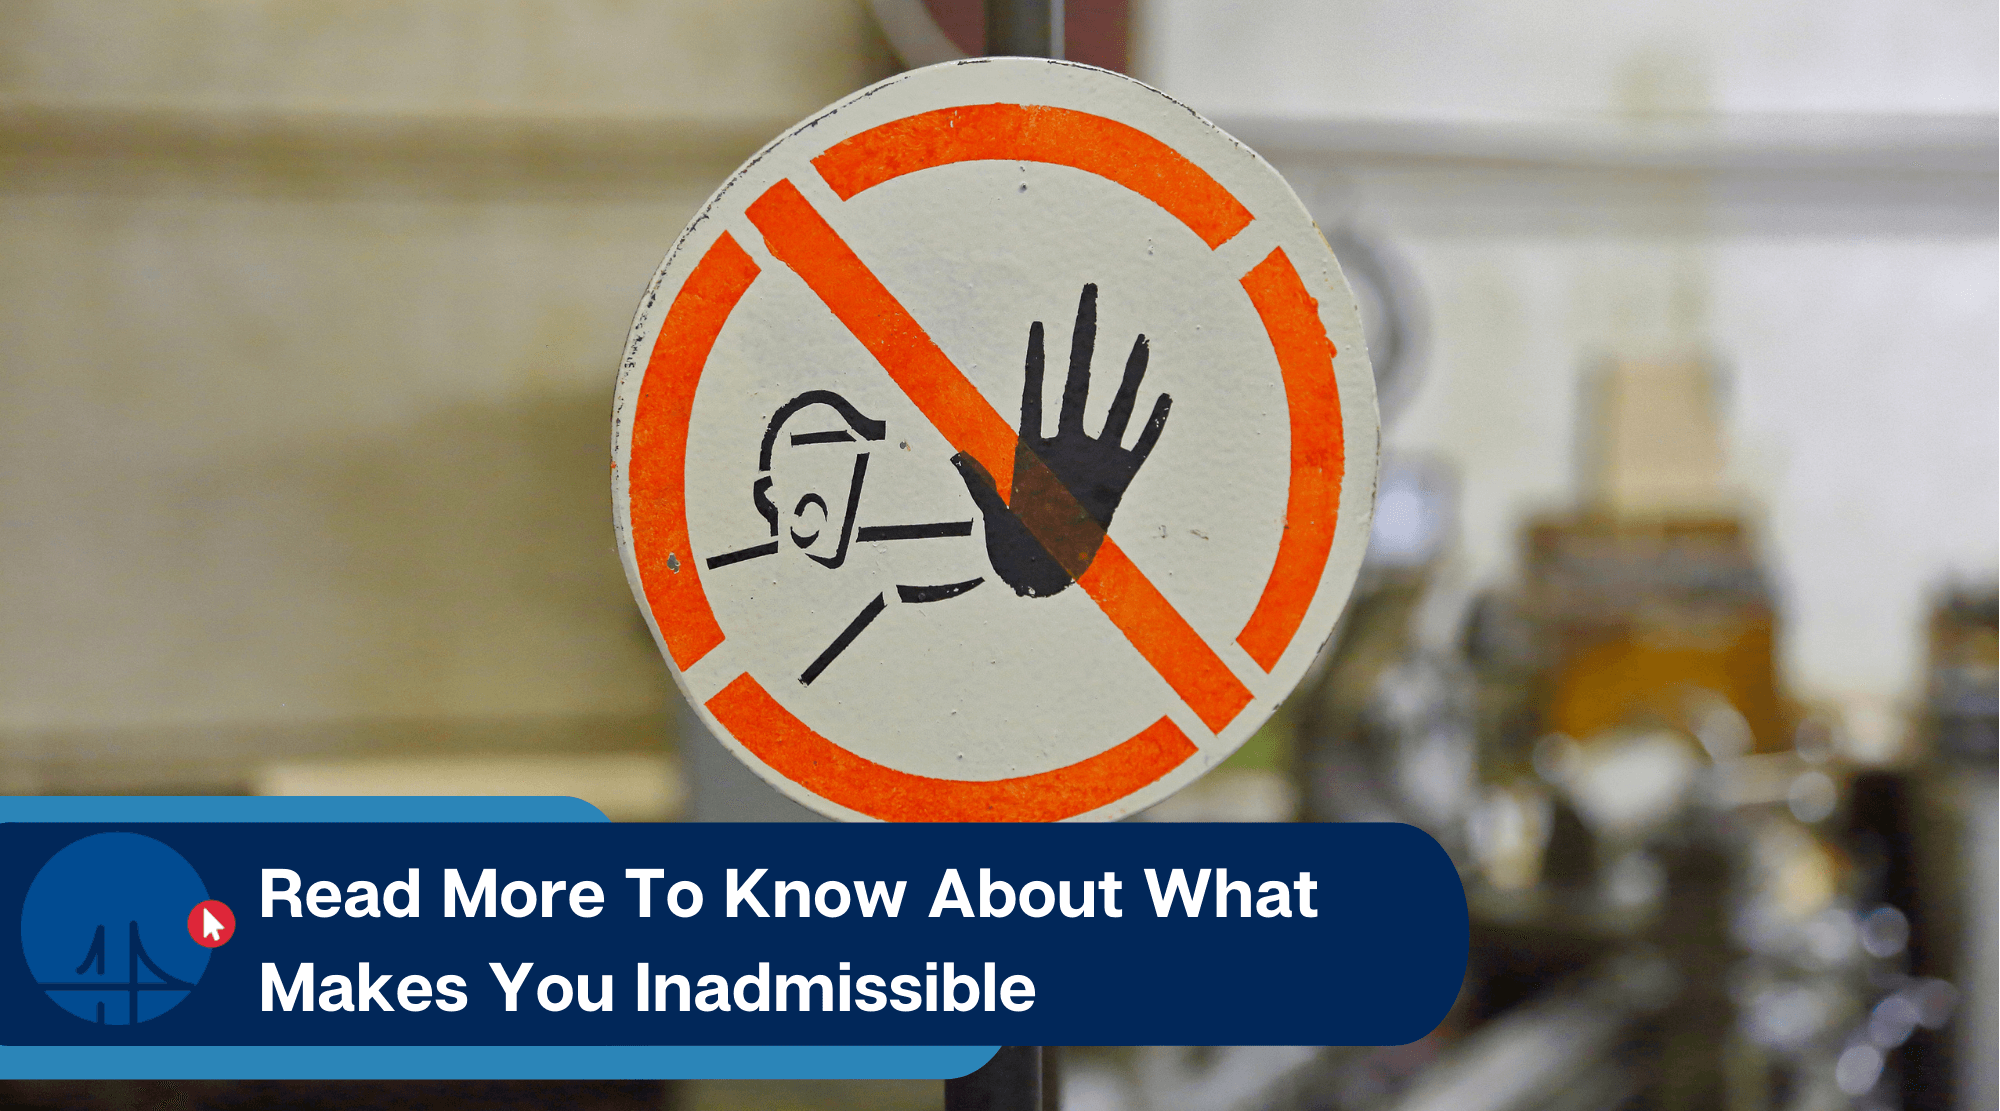 Read more to know about what makes you inadmissible